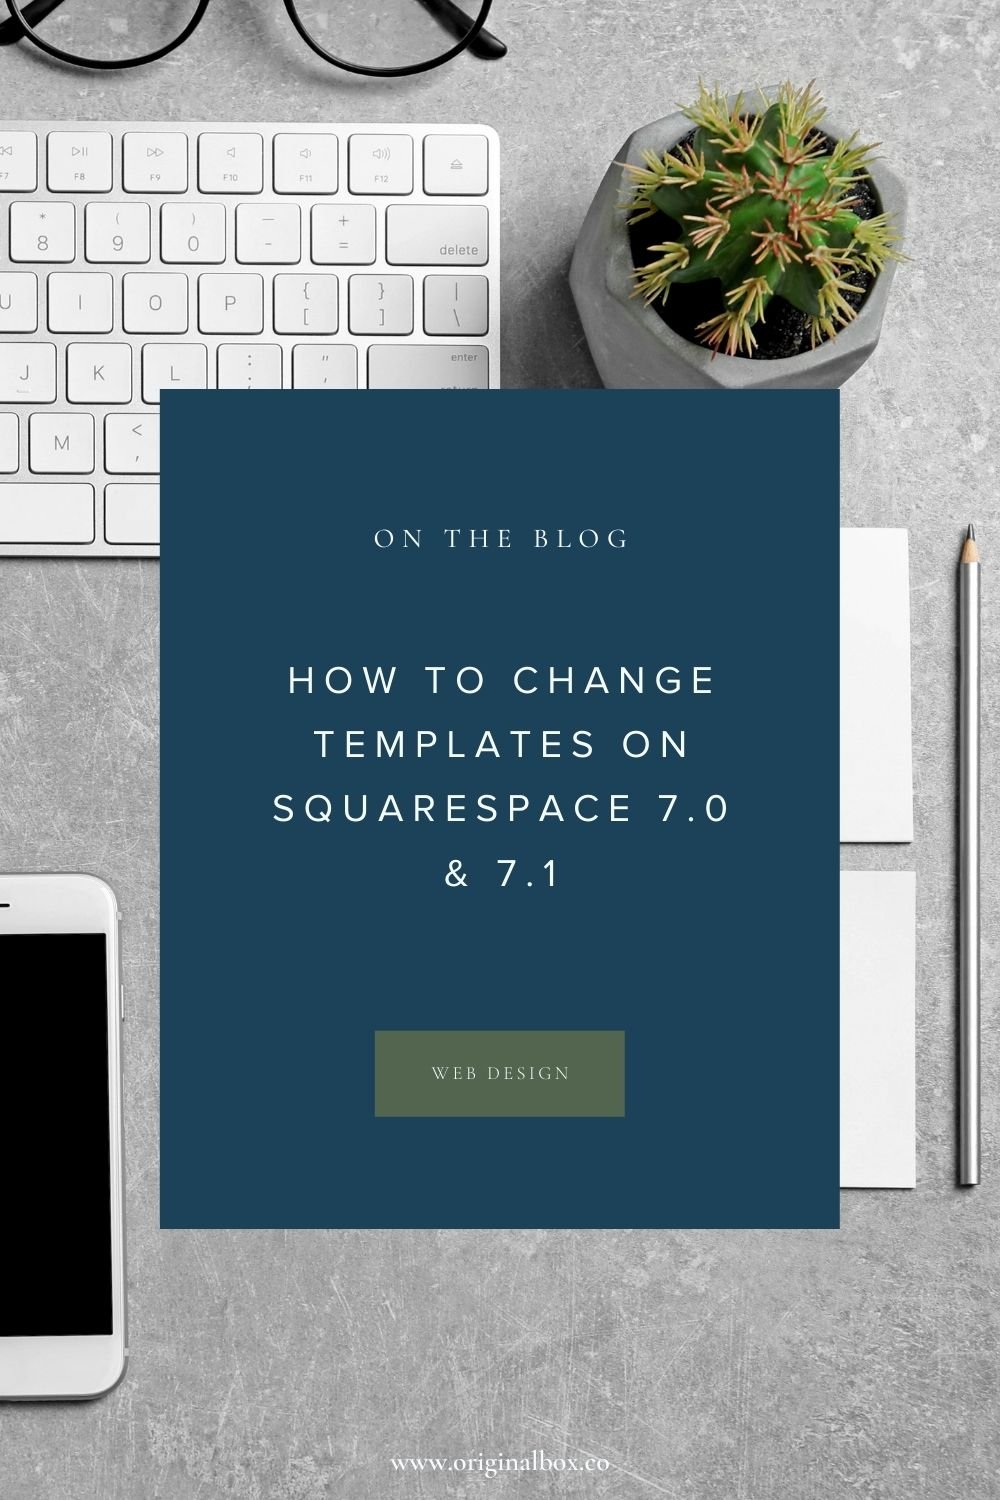 How to change templates on Squarespace — BE NO LIMITS